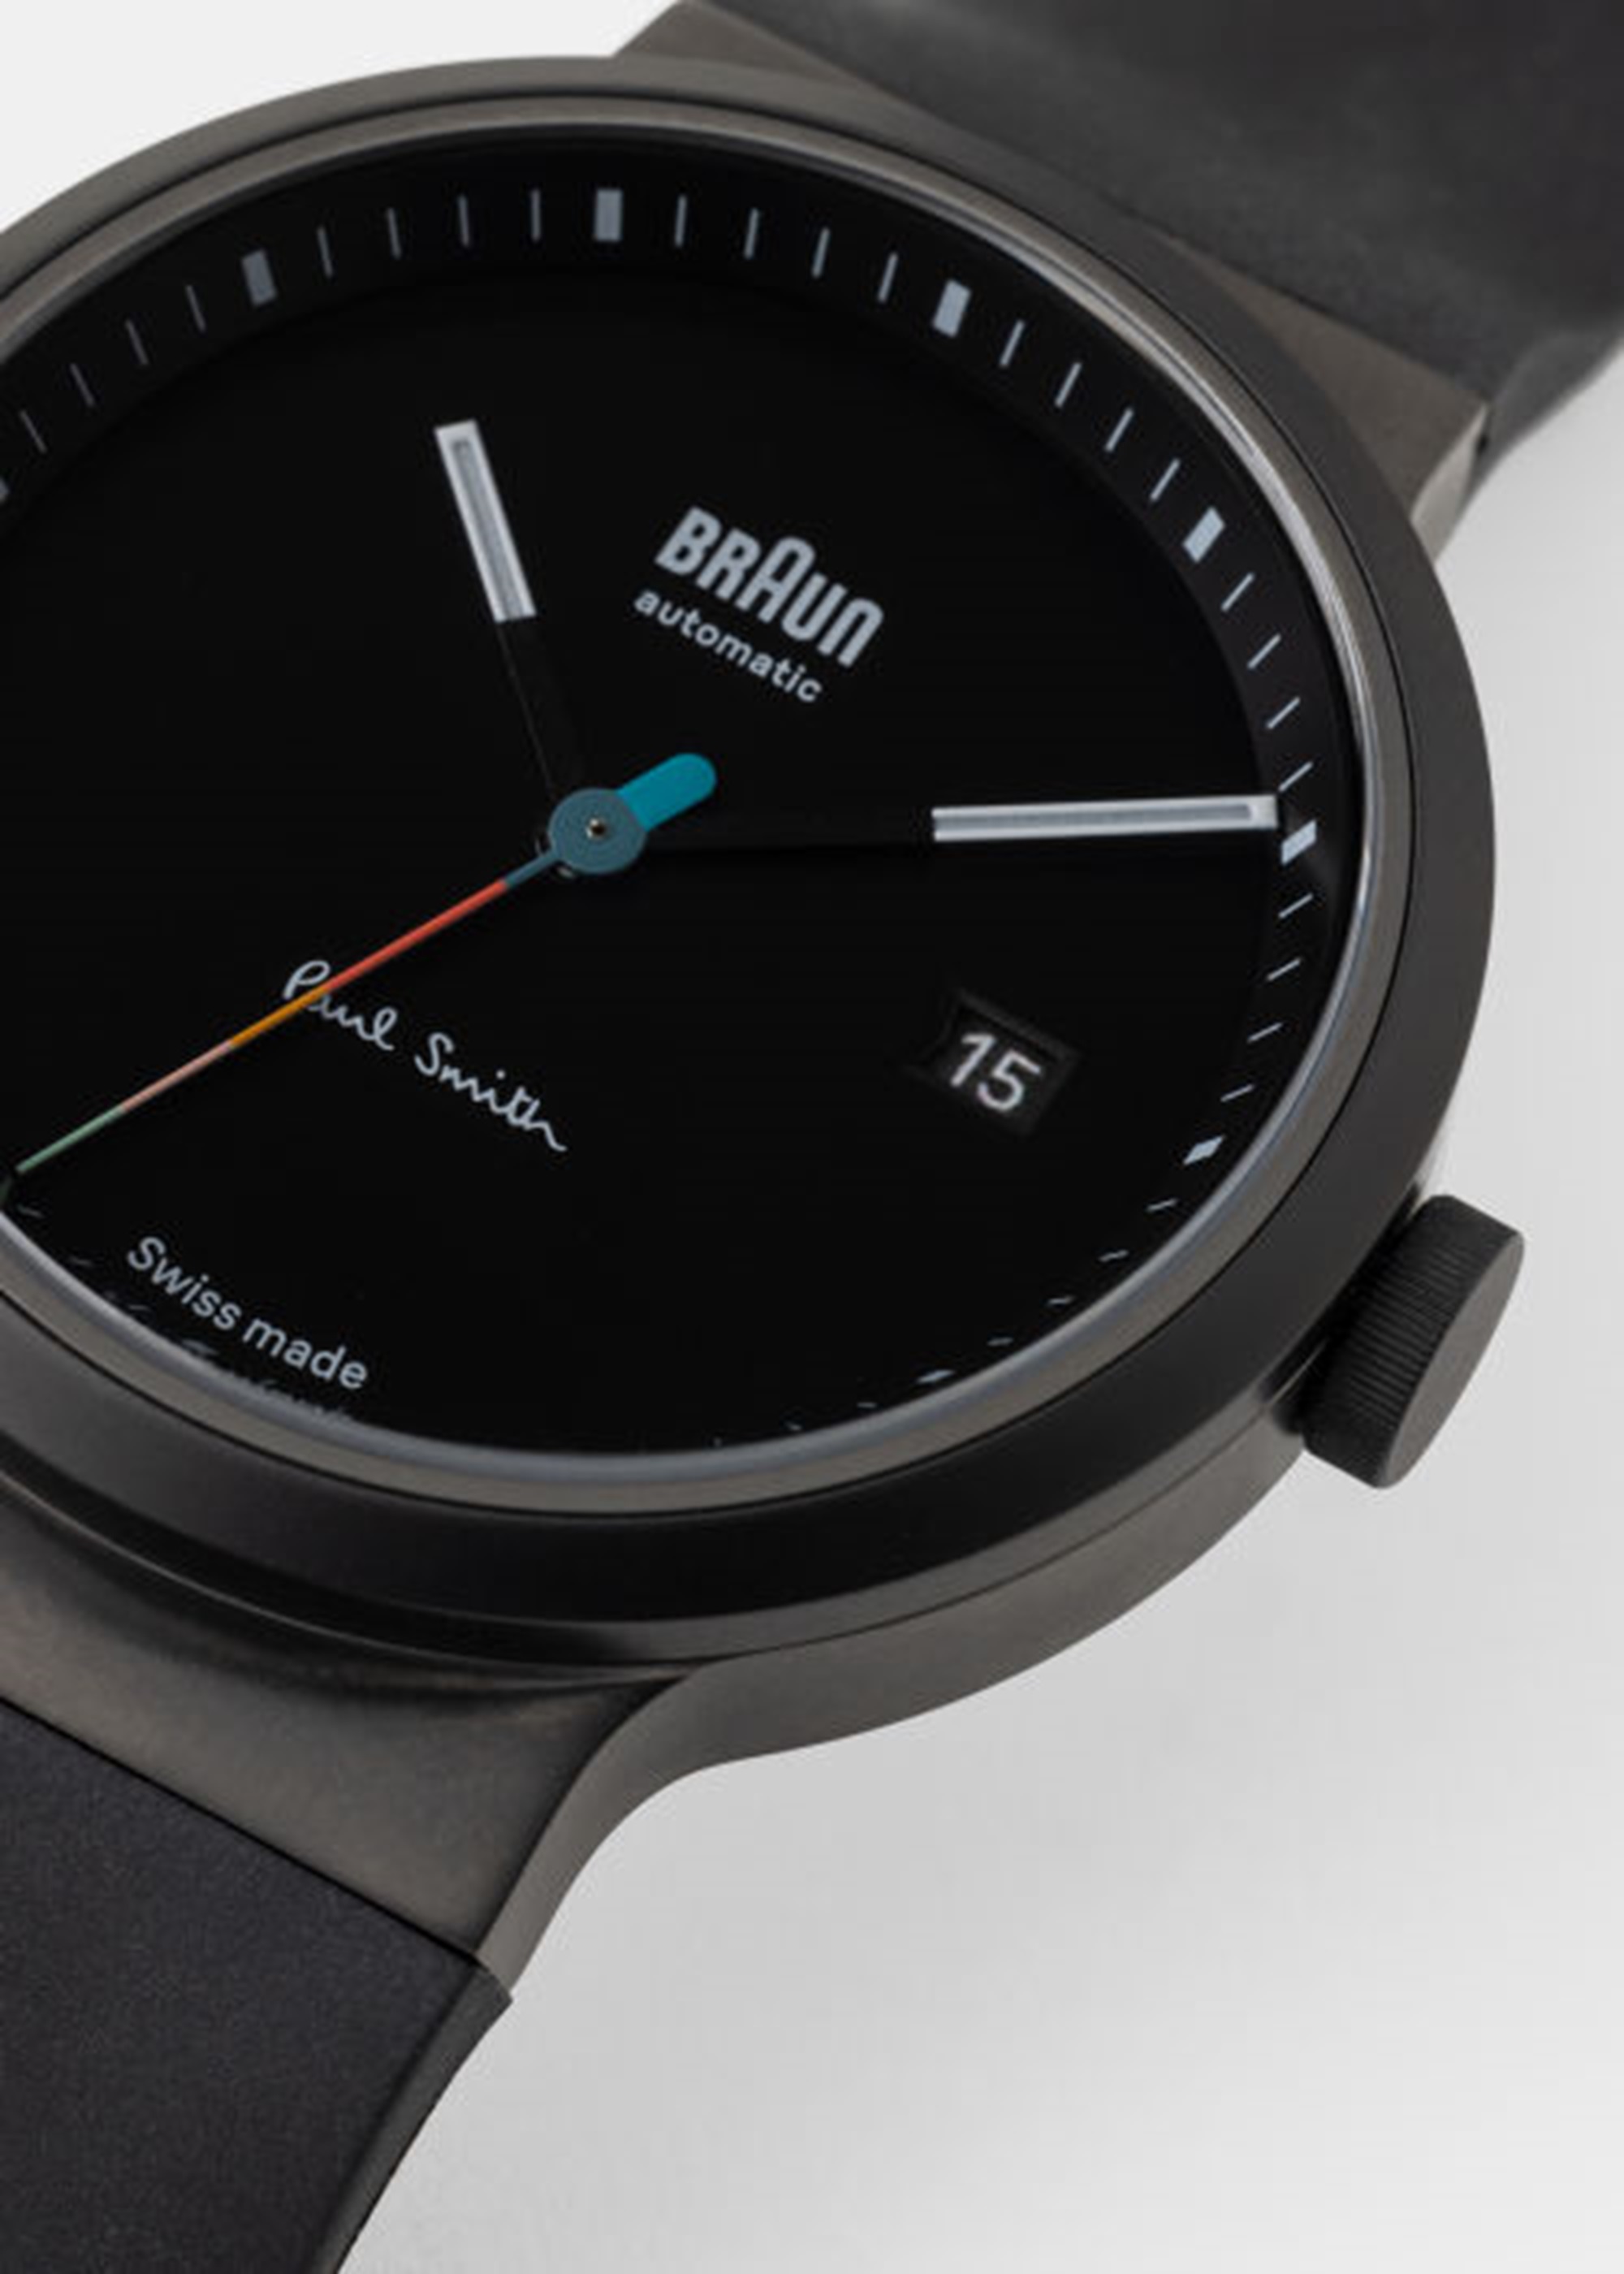 Braun and Paul Smith collaboration watch